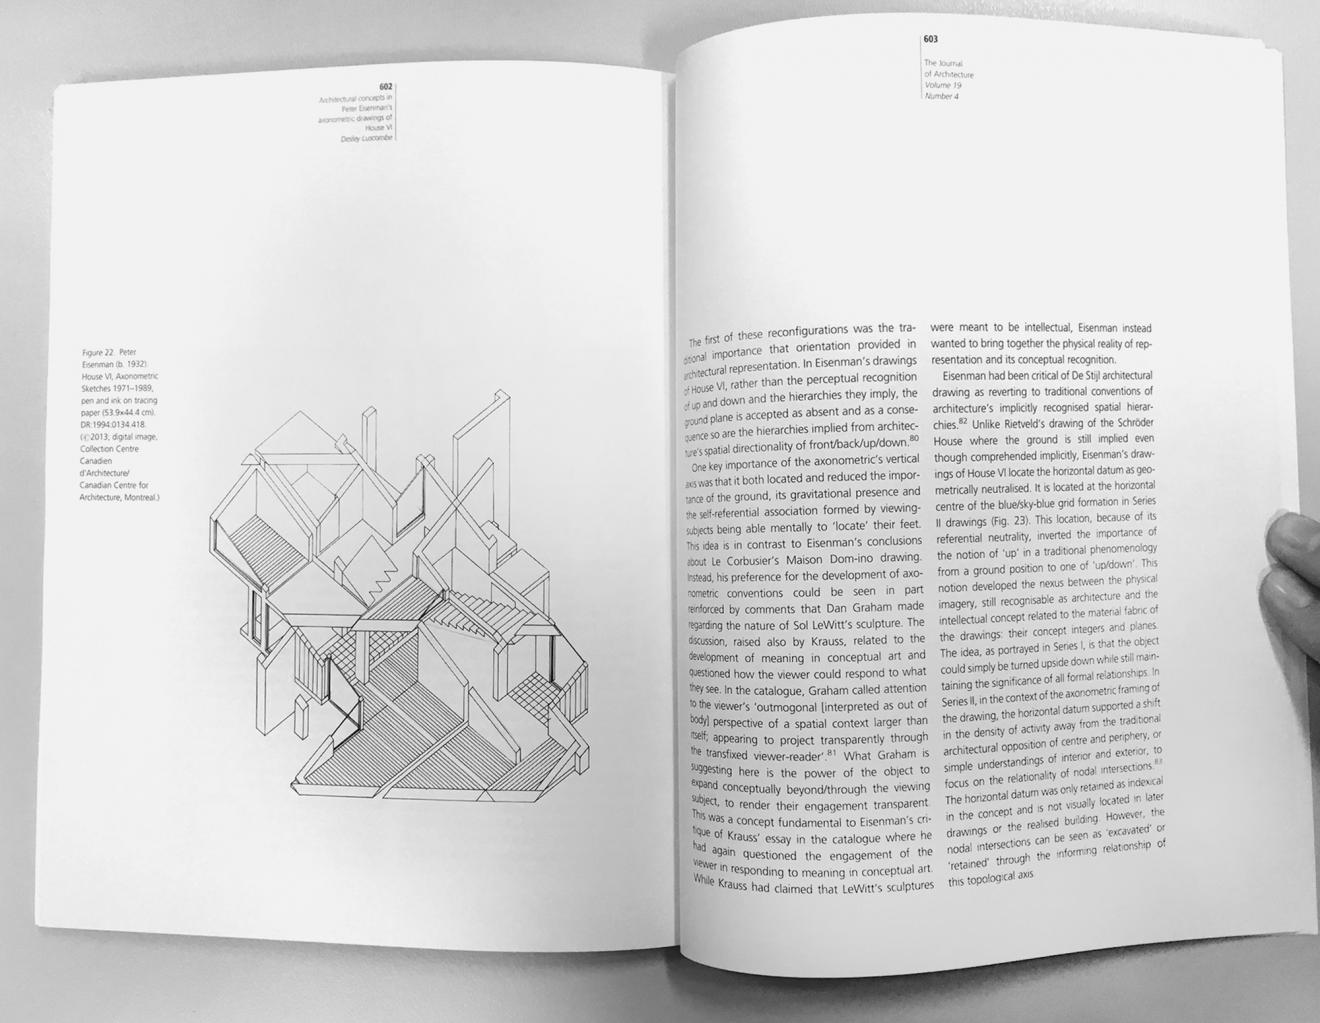 DAB Staff Project: Architectural Concepts In Peter Eisenmans Axonometric Drawings Of House VI, by Desley Luscombe